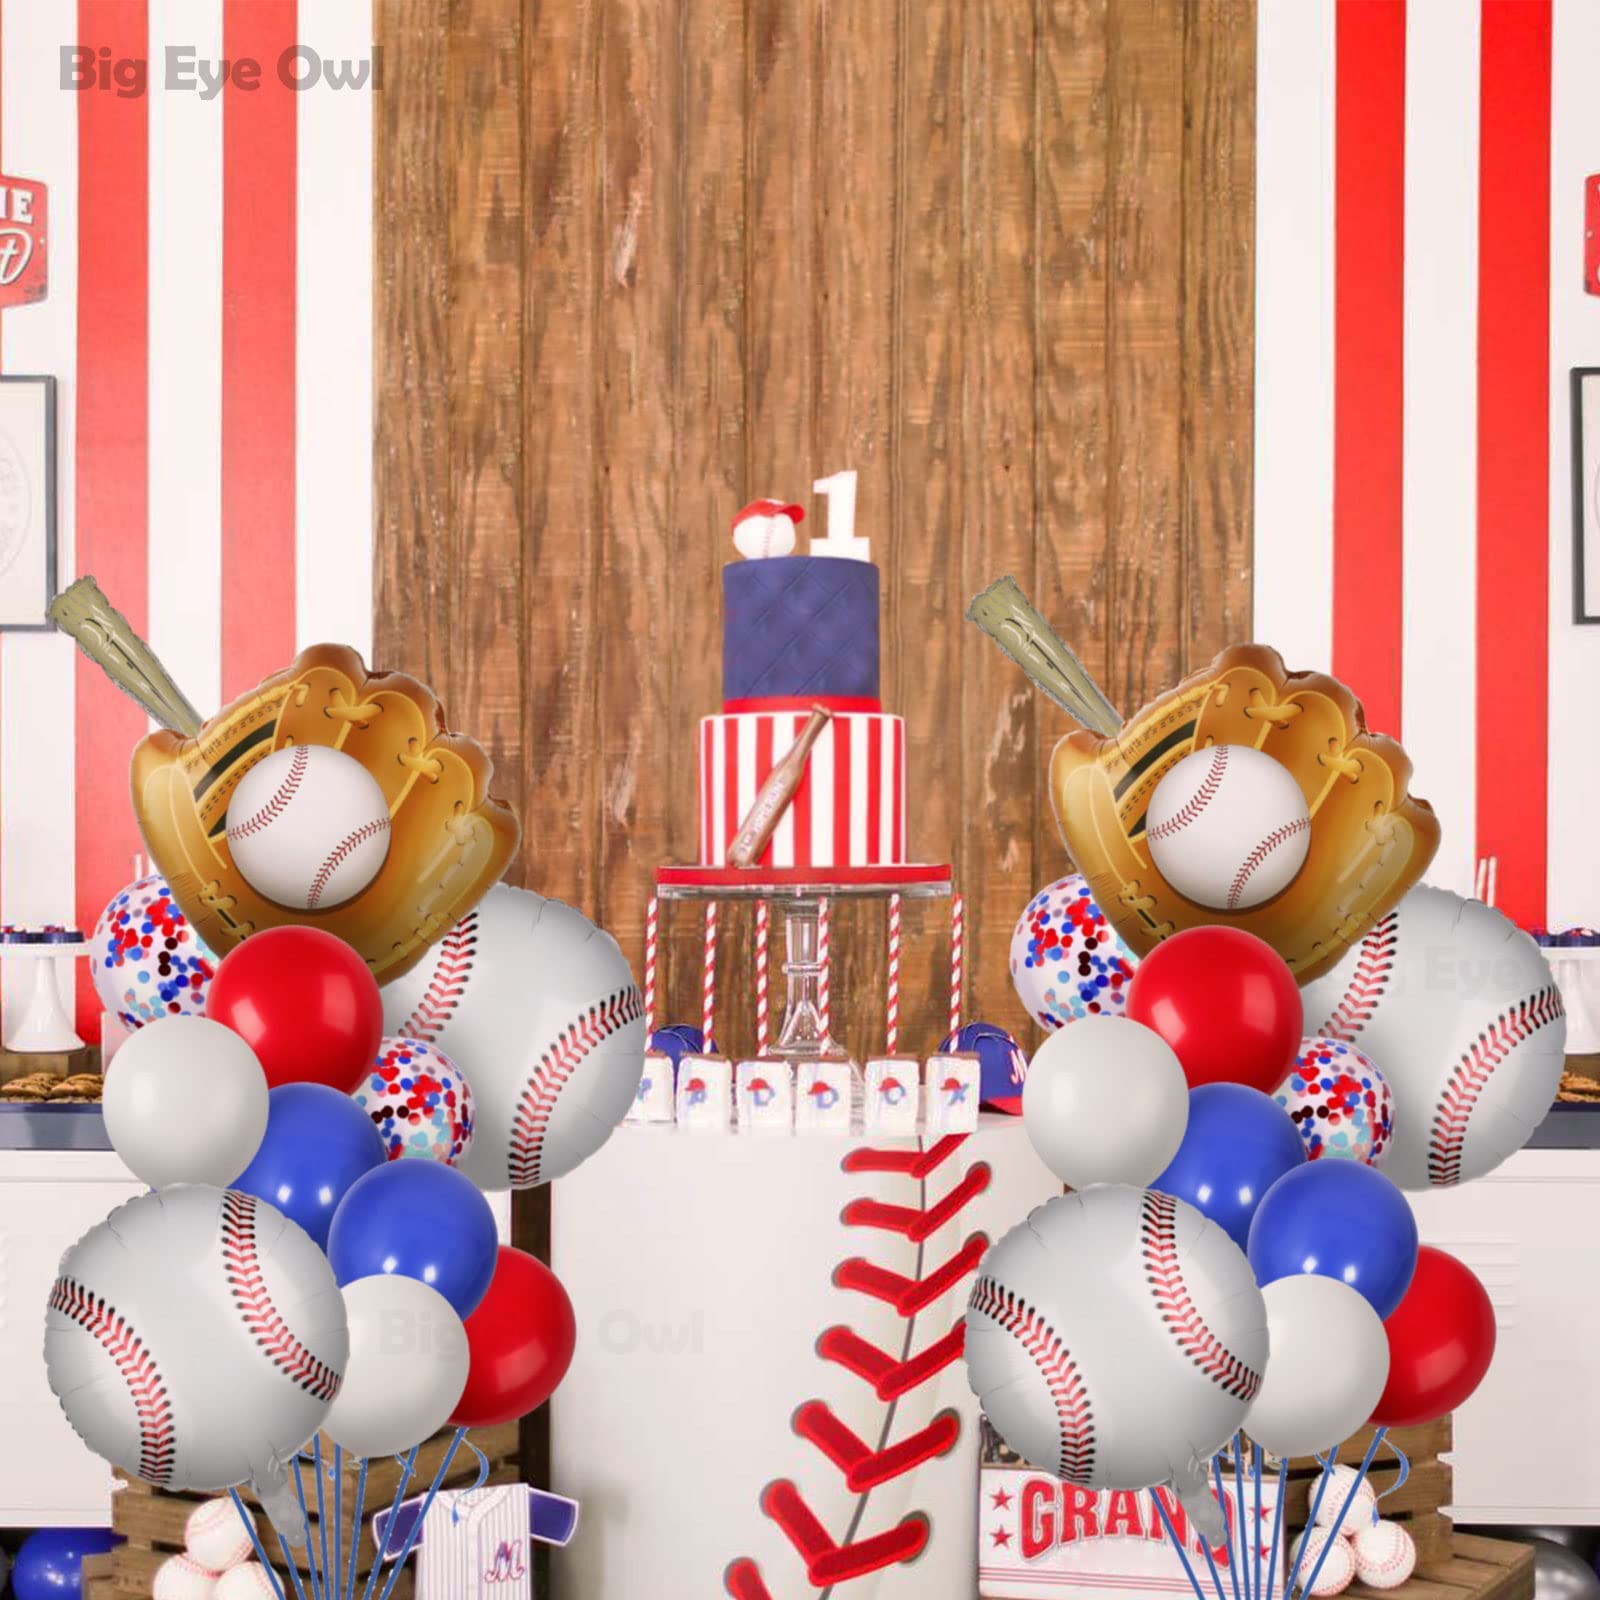 Baseball Balloons Birthday Party Supplies Decorations Glove Round Baseball Bat Theme Mylar Confetti Red and Blue white Foil Balloon Boy Baby Shower